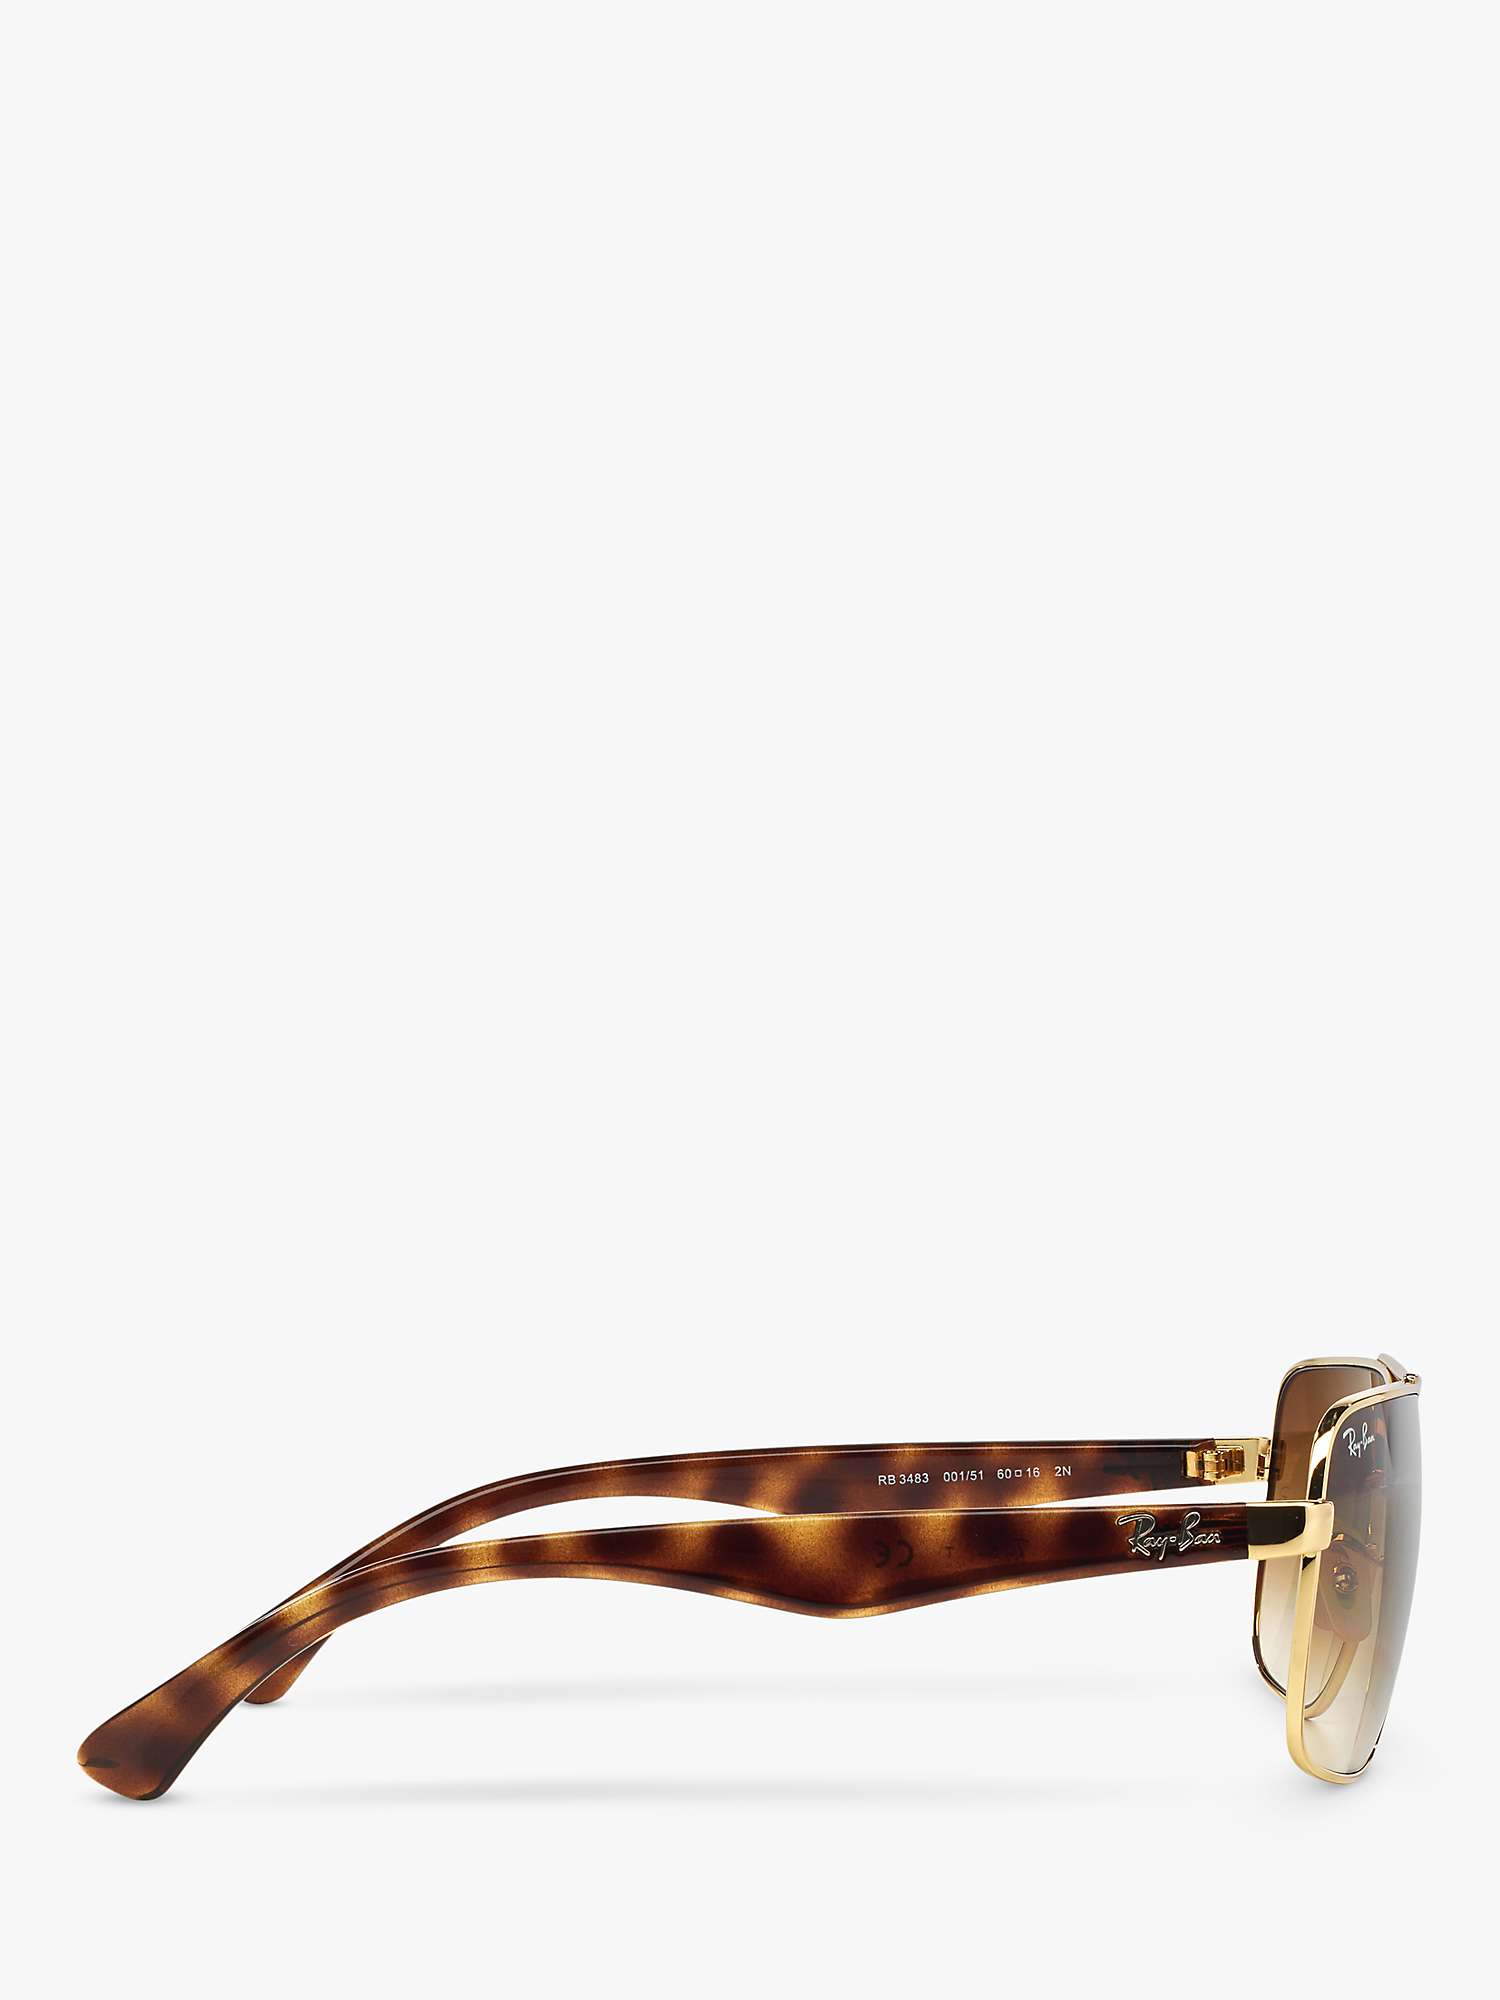 Buy Ray-Ban RB3484 Men's Square Sunglasses, Arista Gold/Brown Online at johnlewis.com